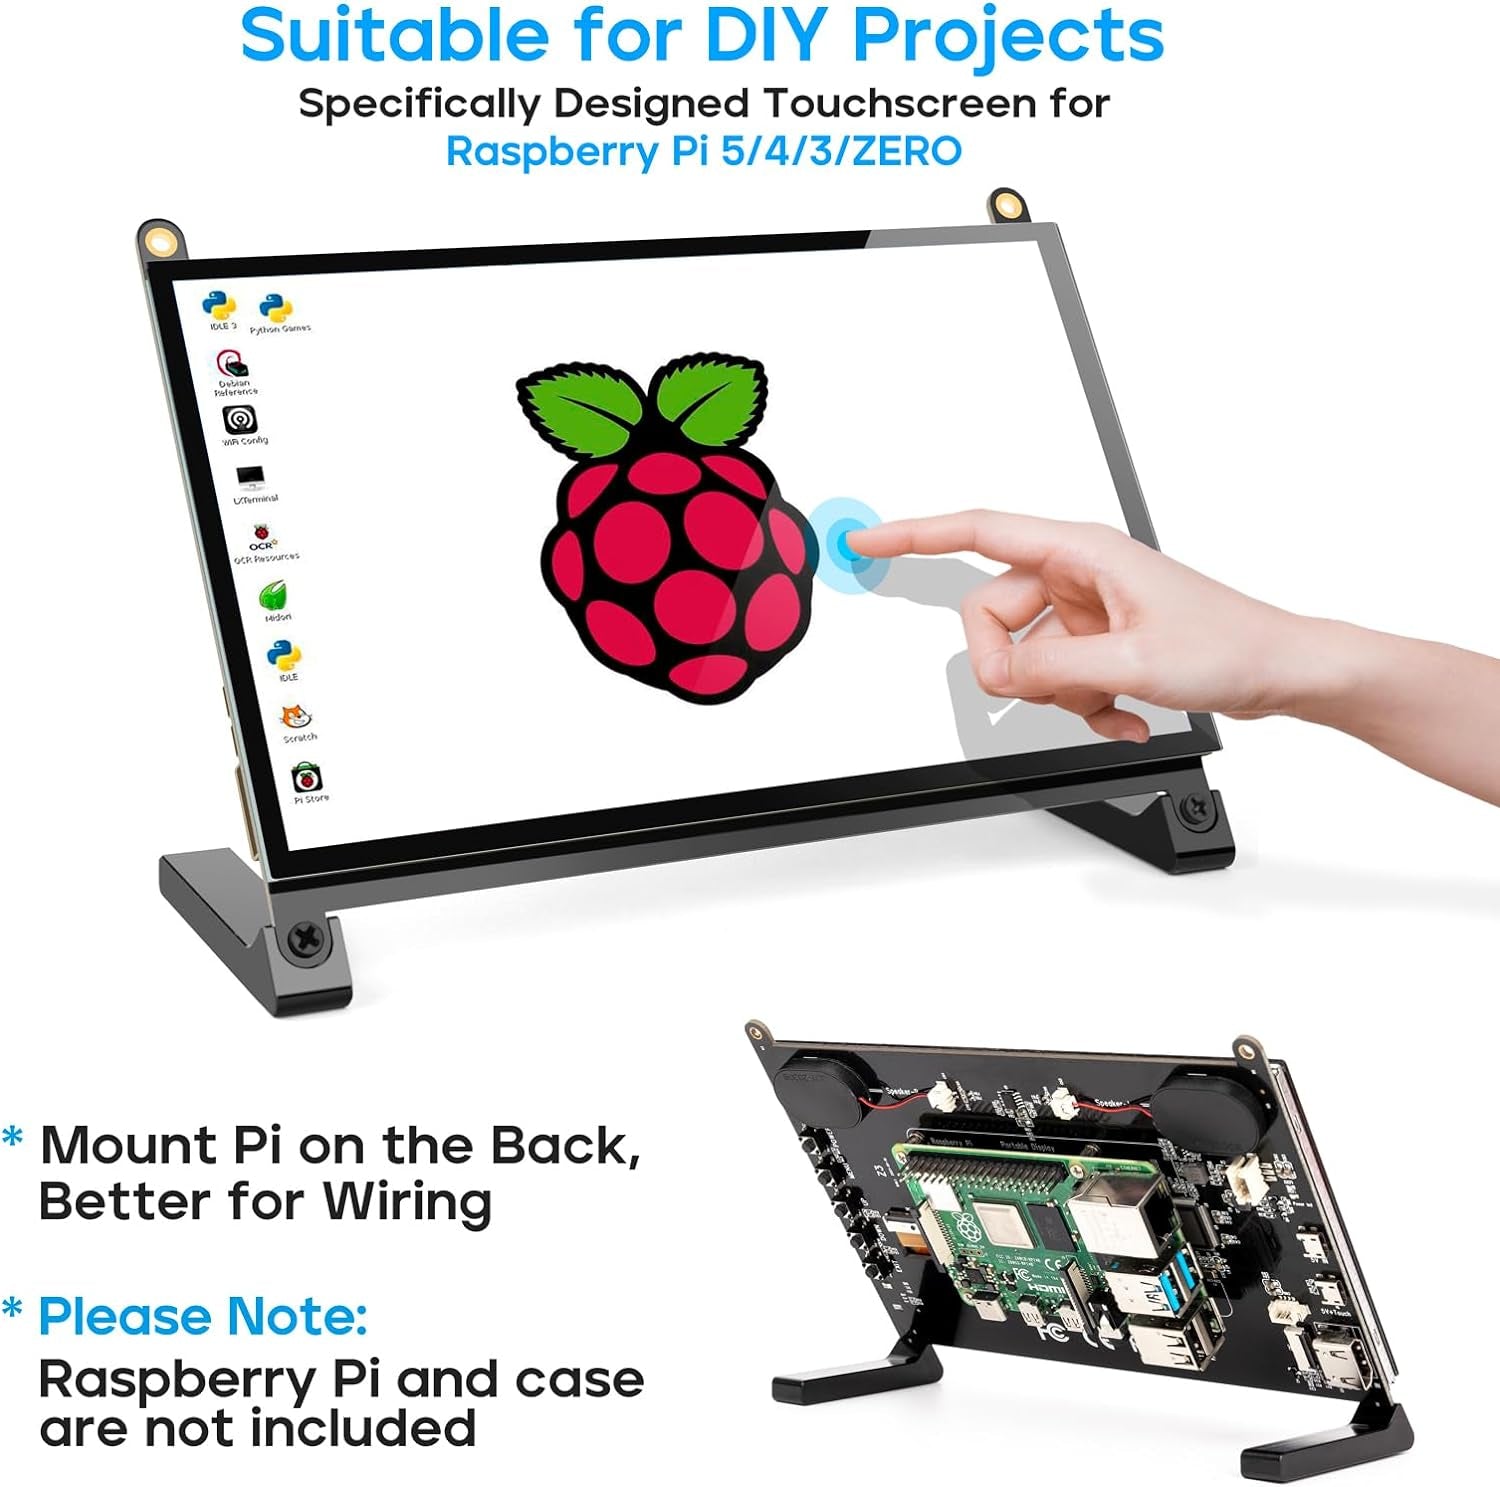 Touchscreen Monitor,Upgraded 7'' IPS 1024X600 Dual-Speaker,Usb HDMI Portable SVGA Wide Monitor Capacitive Pi Display,Compatible with Raspberry Pi 5/4/3/Zero, Windows,Drive-Free